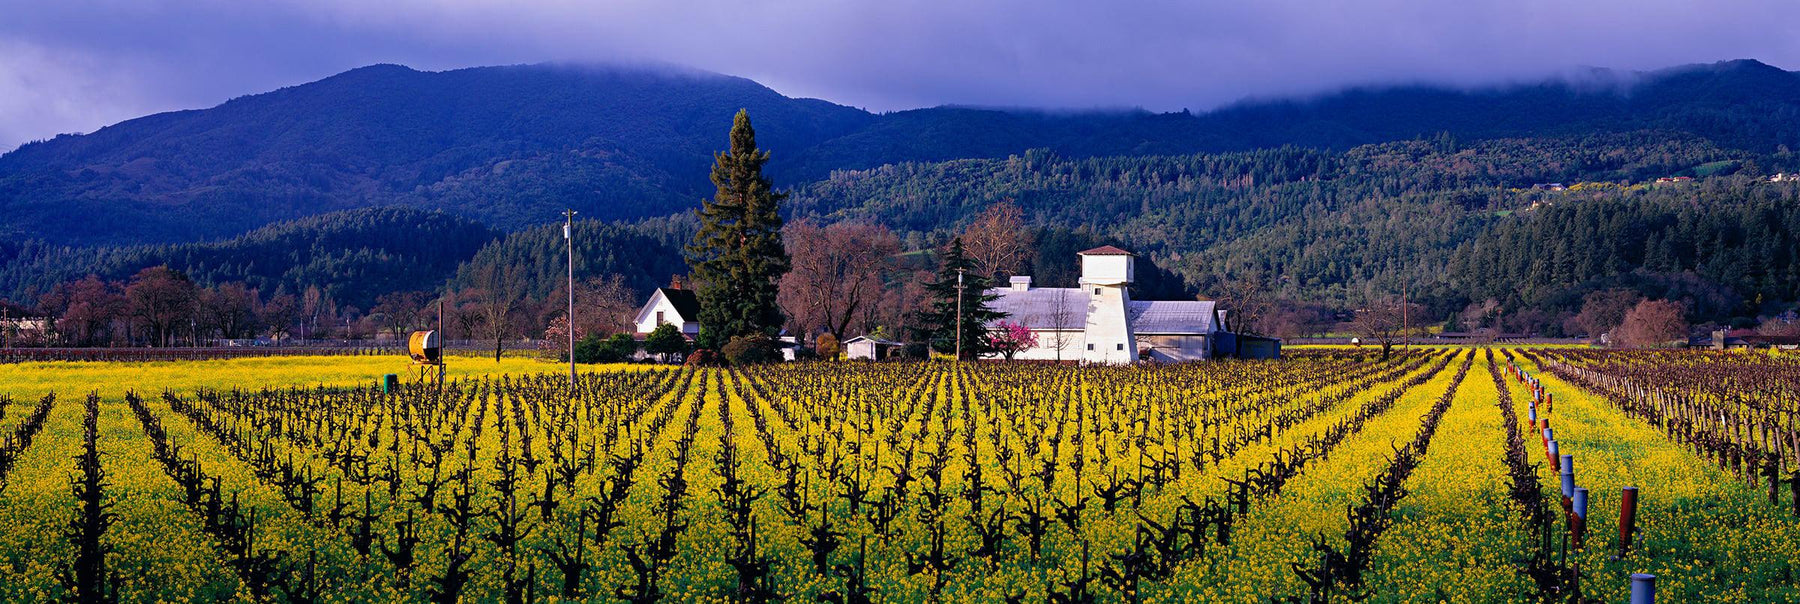 Vineyard with rows of grape plants in Napa California surrounded by mustard flowers in Spring